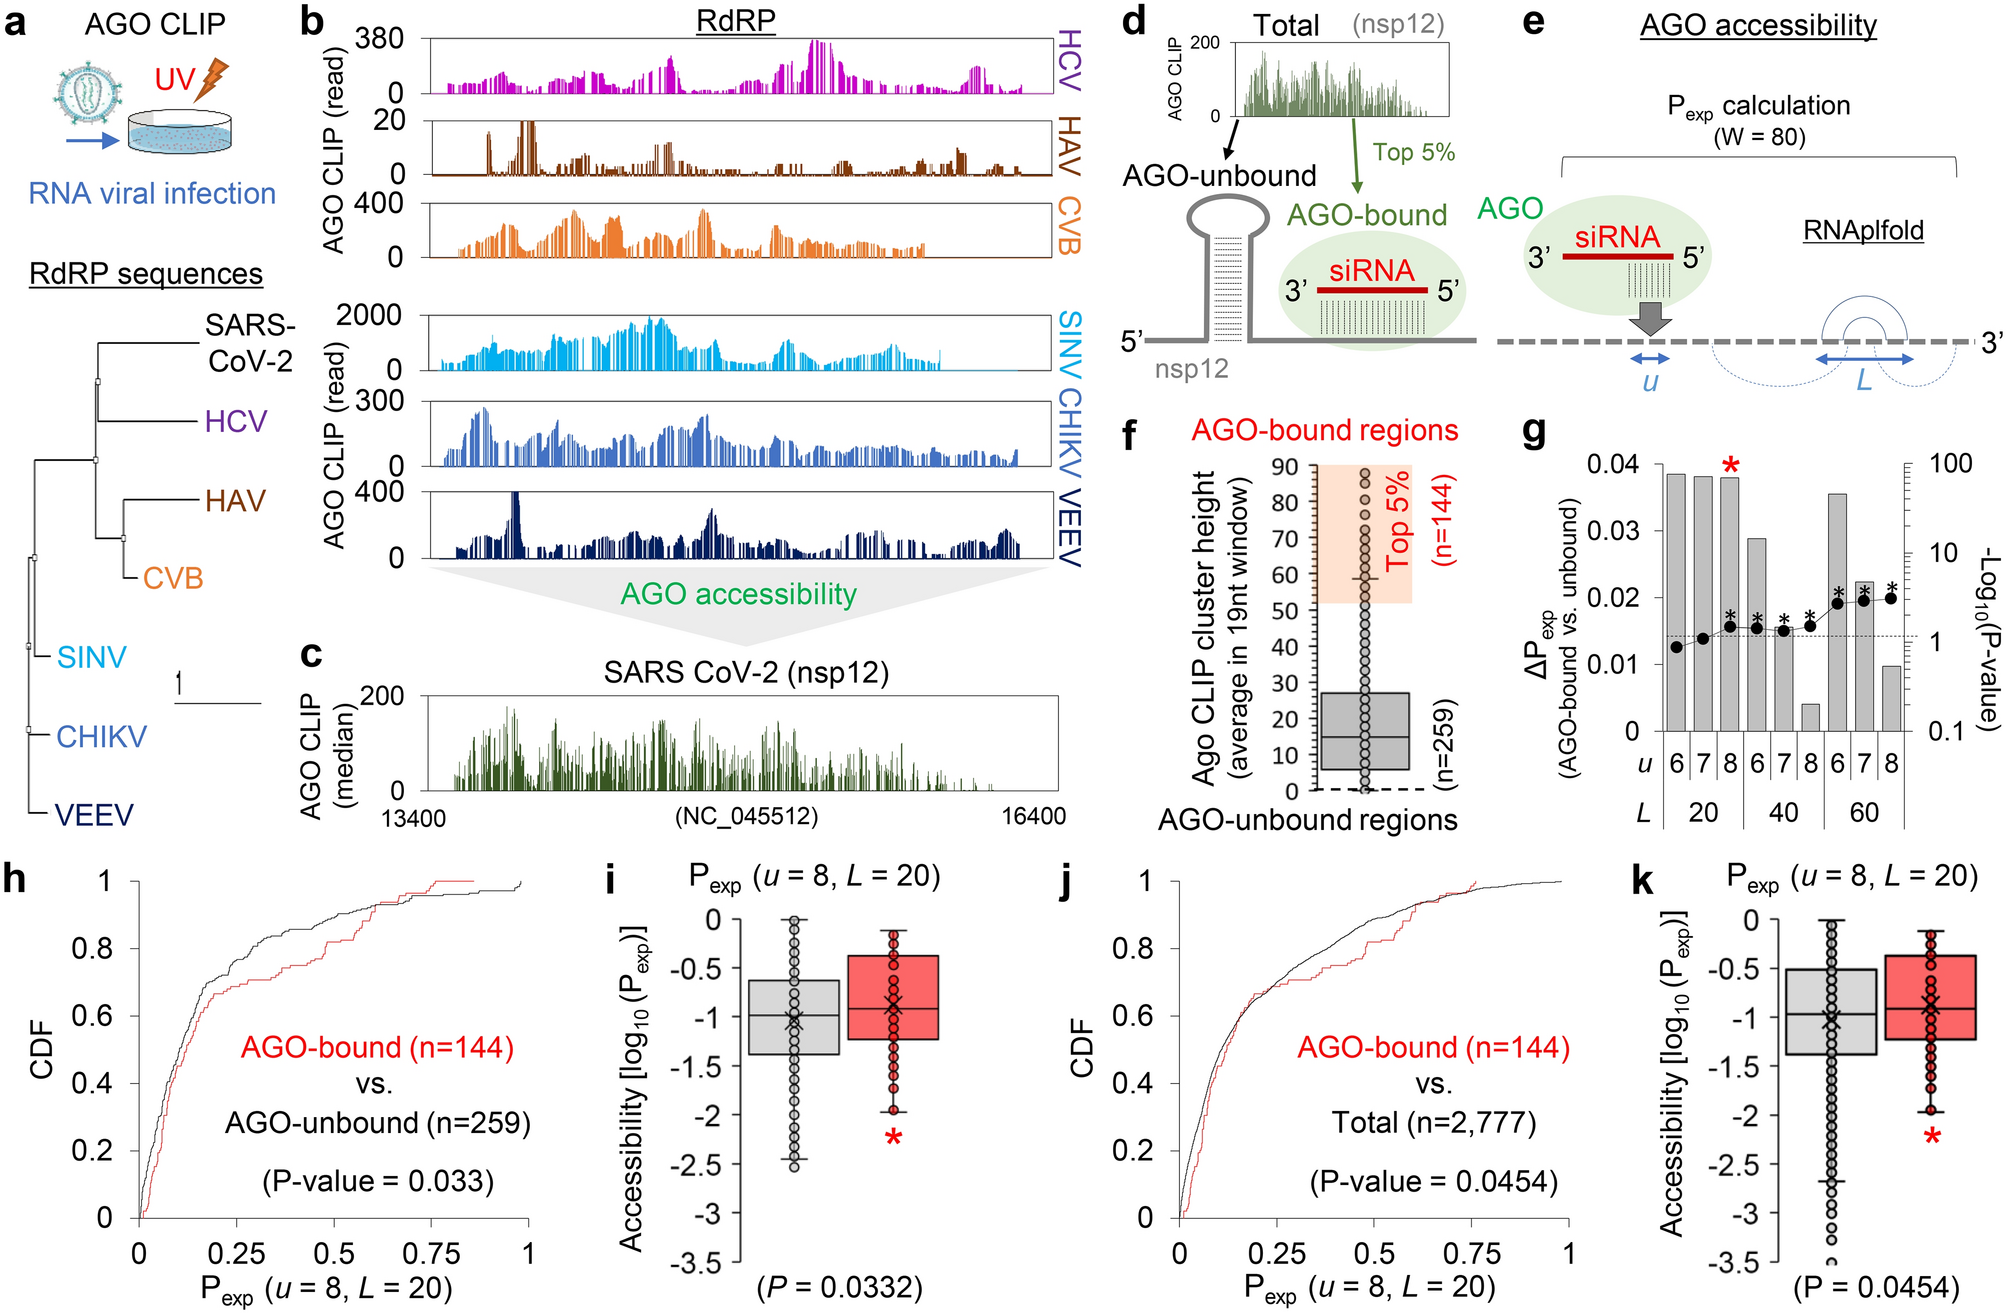 AGO CLIP-based imputation of potent siRNA sequences targeting SARS-CoV-2  with antifibrotic miRNA-like activity | Scientific Reports